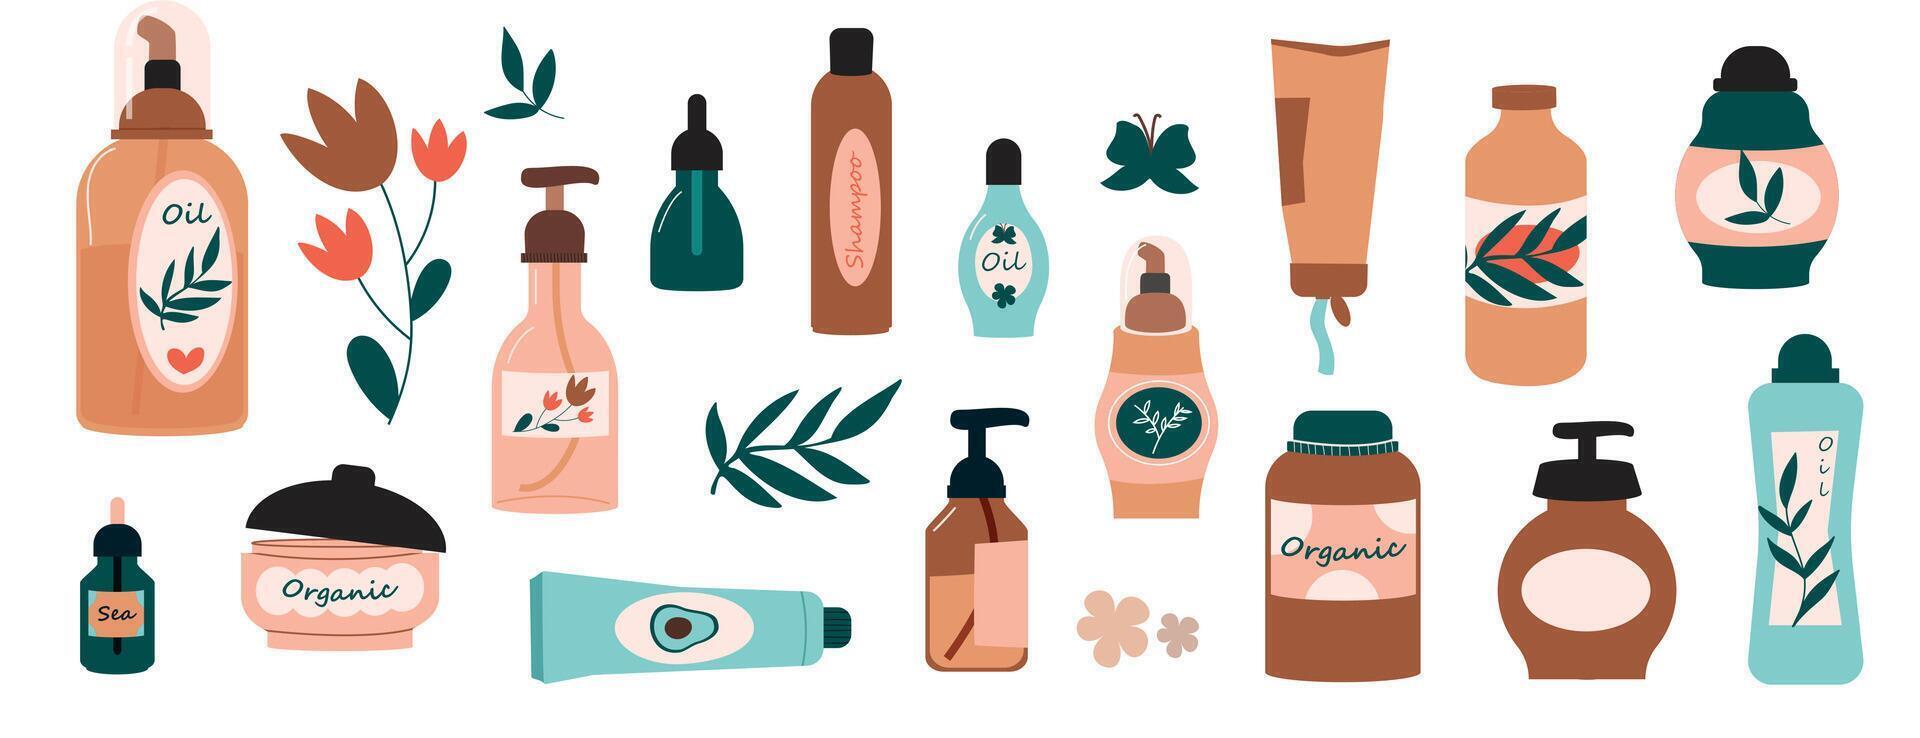 Organic make up packaging. Hand drawn cosmetic products and skin care natural treatment, glass bottles, paper tubes and glass jars. Vector scrub lotion and shampoo set